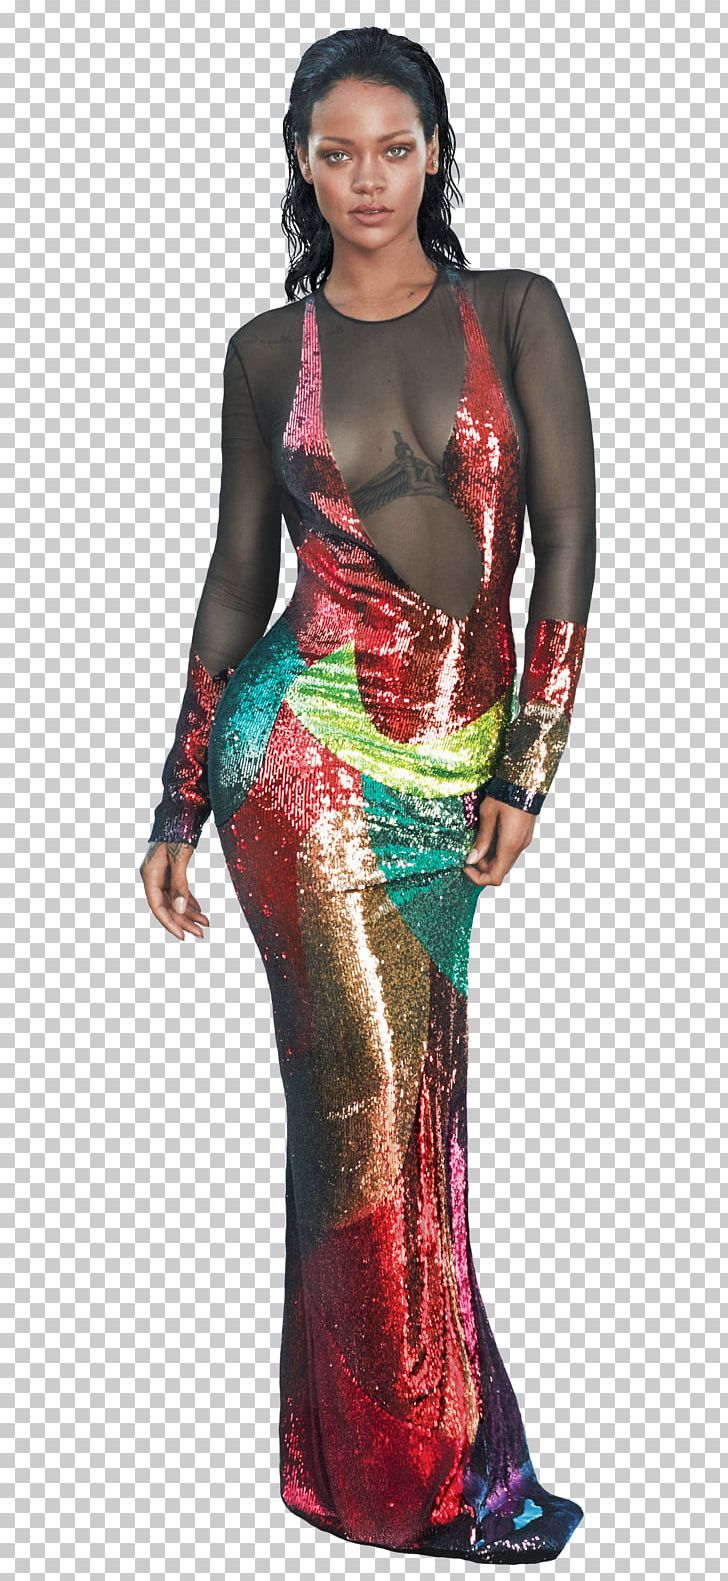 Rihanna Vogue Mert And Marcus Fashion Model PNG, Clipart, Clothing, Costume, Fashion, Fashion Designer, Fashion Editor Free PNG Download